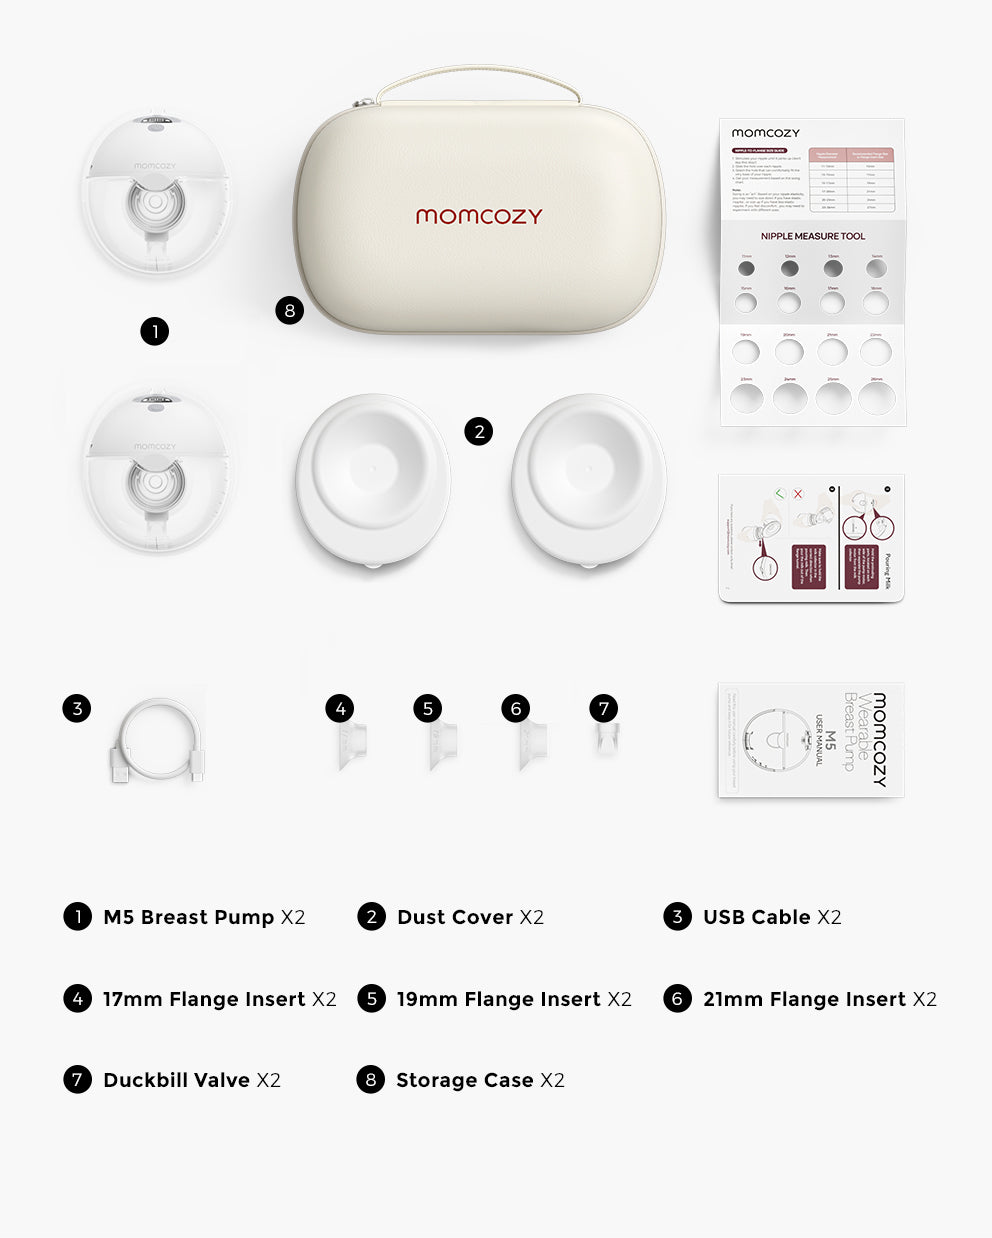 Momcozy Introduces the Revolutionary M5 All-in-one Hands-free Breast Pump -  Empowering Busy Moms with the Ultimate Maternity Solution